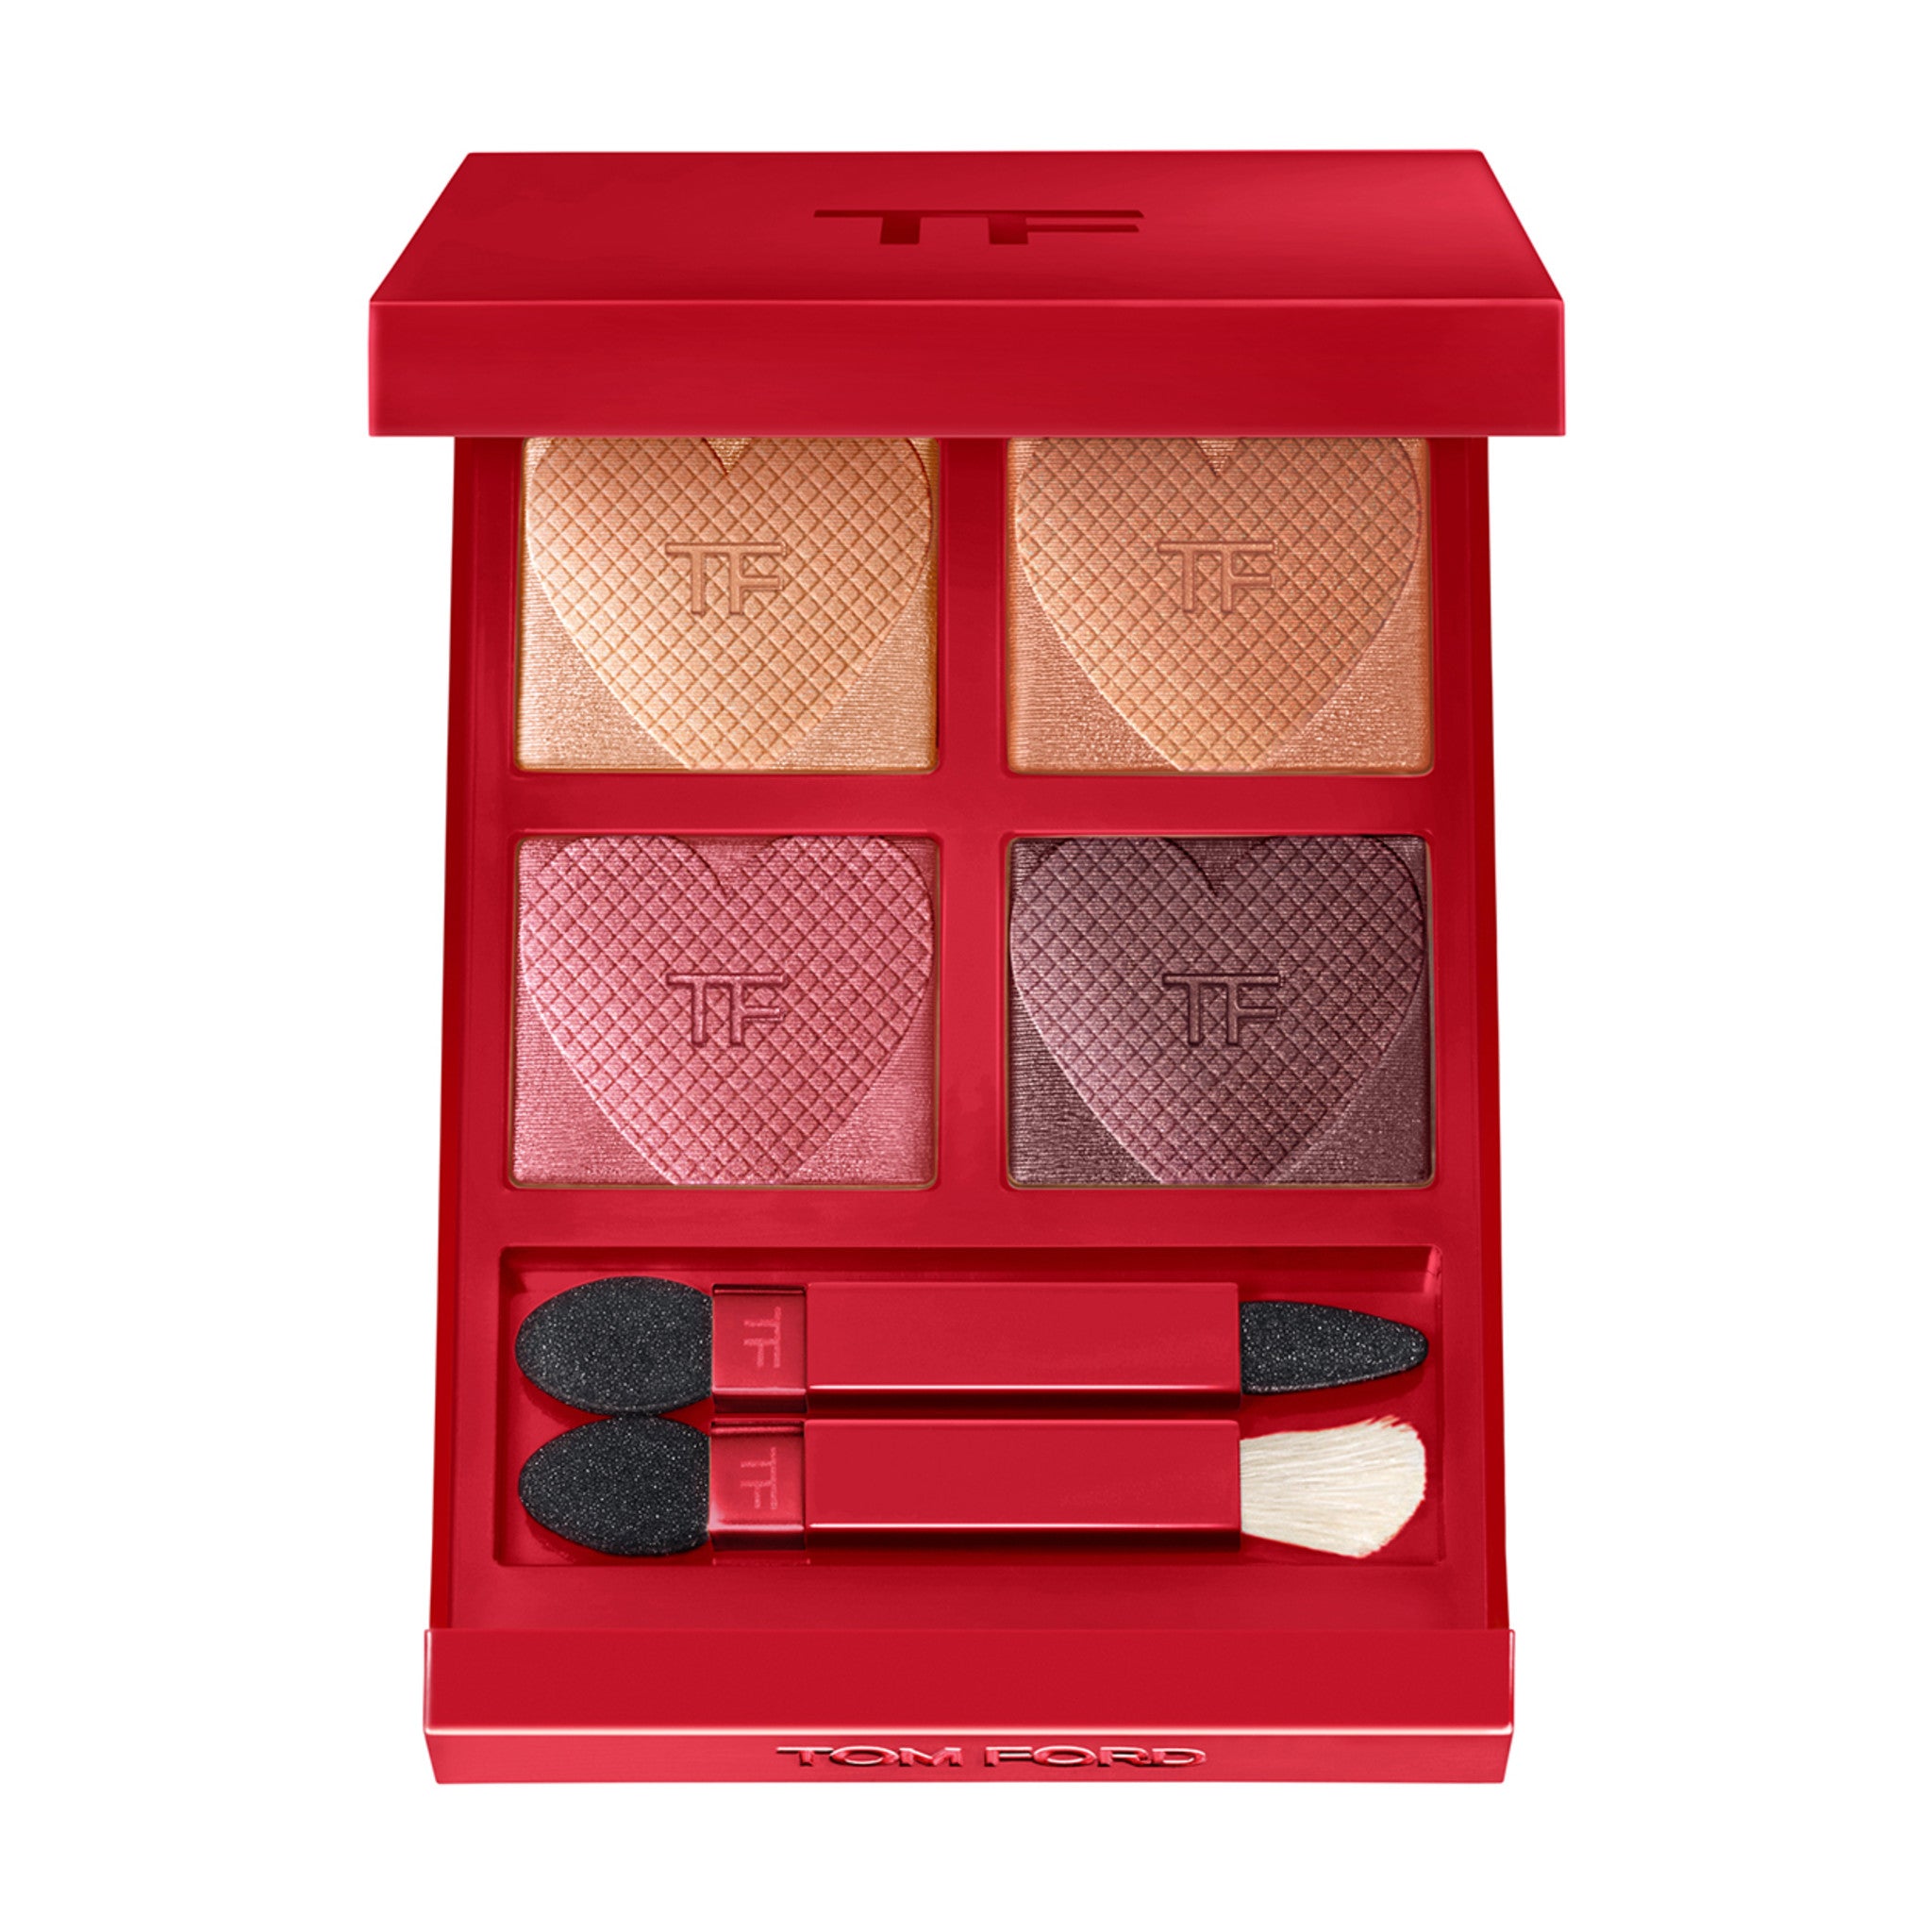 Tom Ford Love Collection Eye Color Quad (Limited Edition) main image. This product is in the color purple